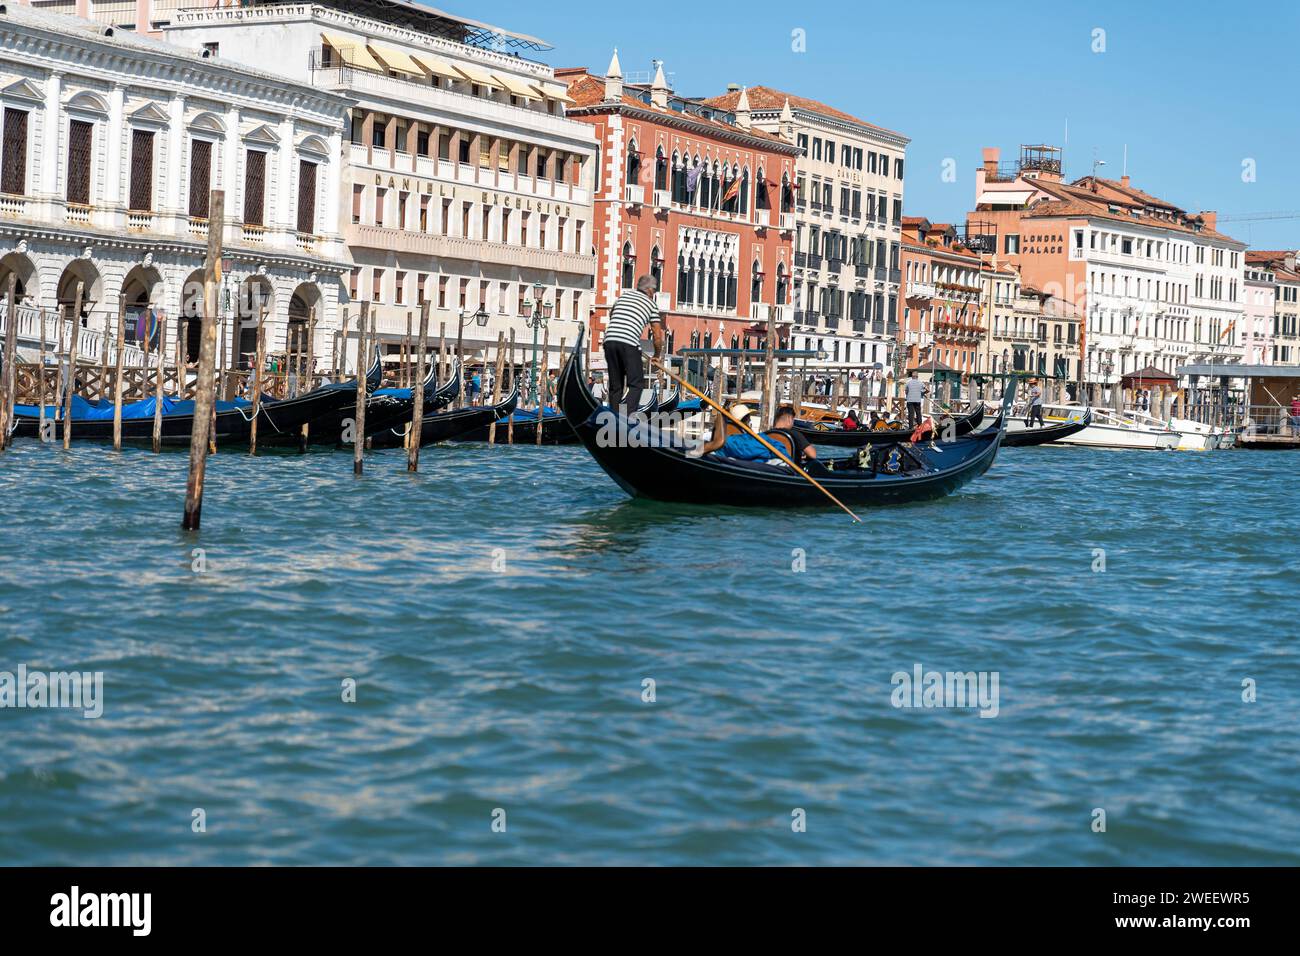 Venice, Italy - September 12, 2022: A small canal in Venice with tourists and gondolas *** Ein kleiner Kanal in Venedig mit Touristen und Gondeln Stock Photo